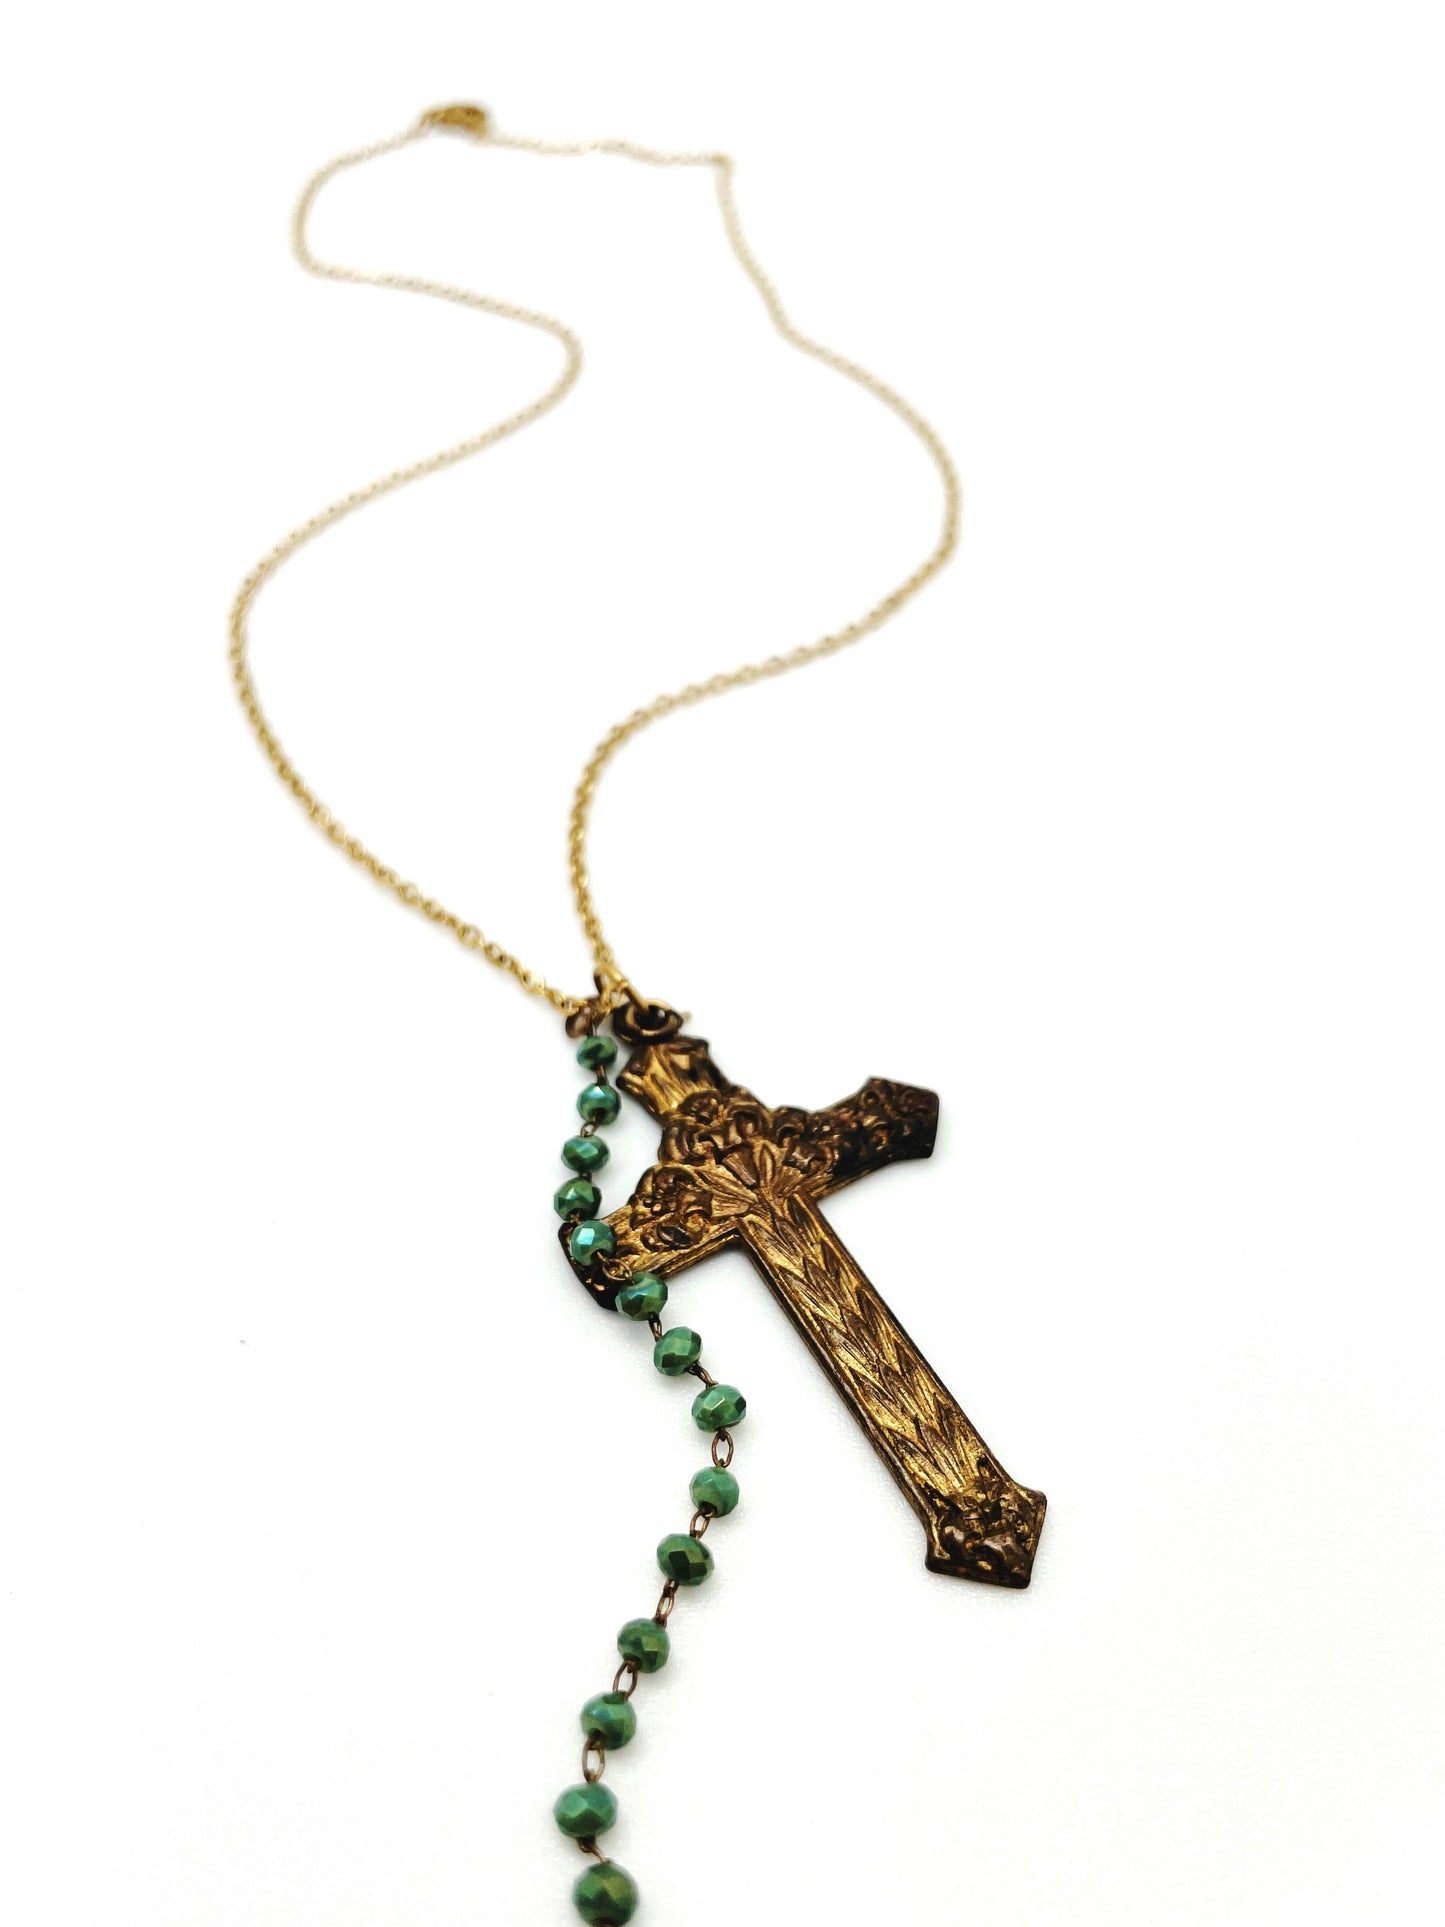 LORD'S PRAYER NECKLACE